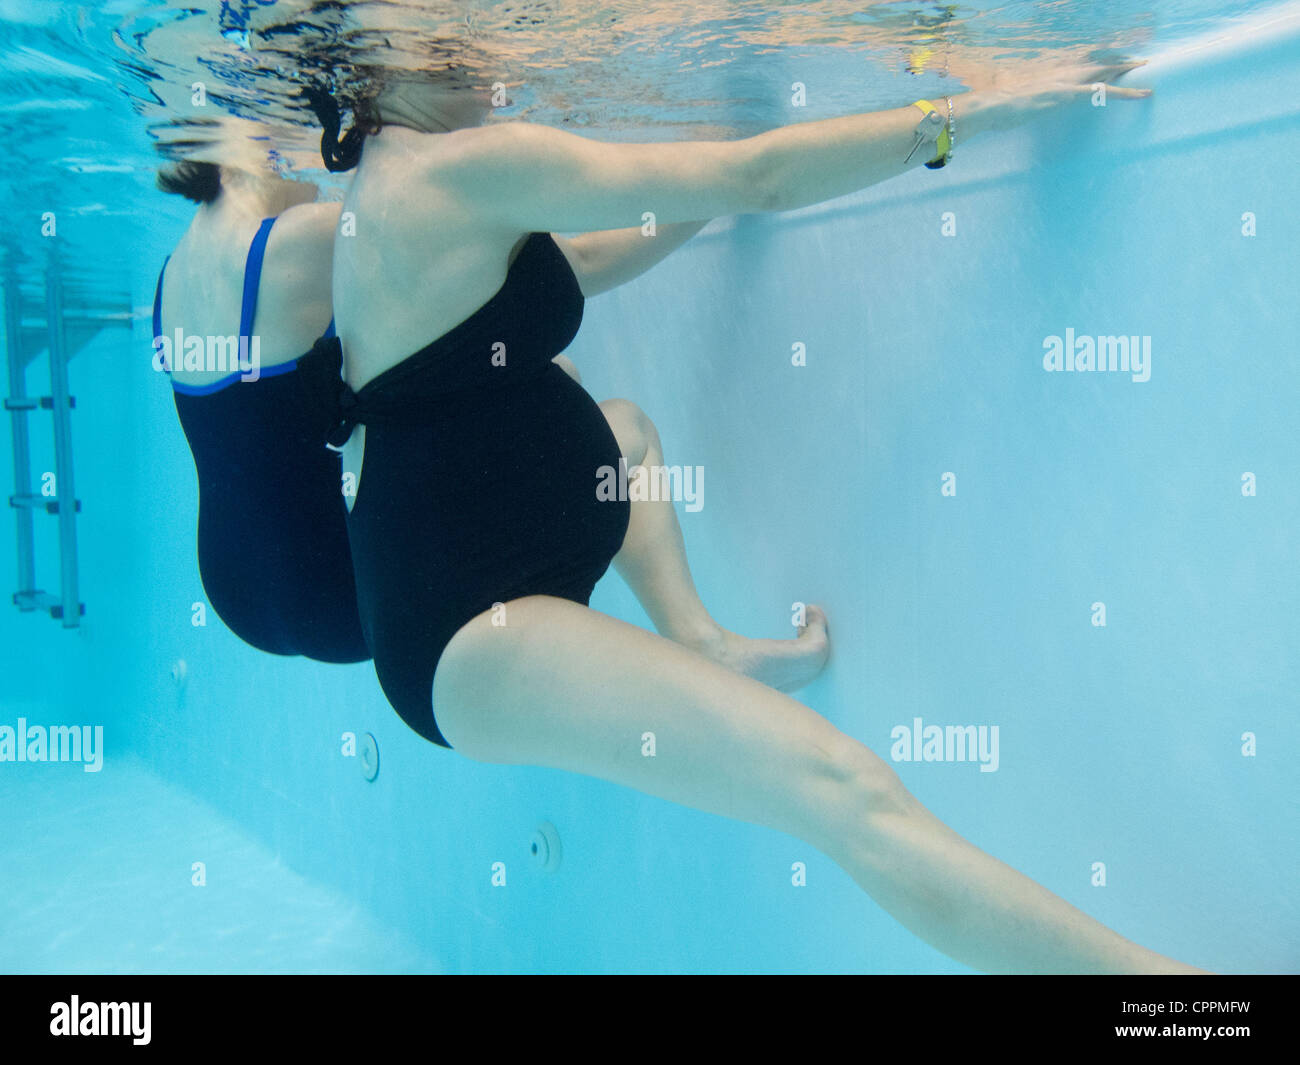 PREGNANT WO. EXERCISING IN WATER Stock Photo